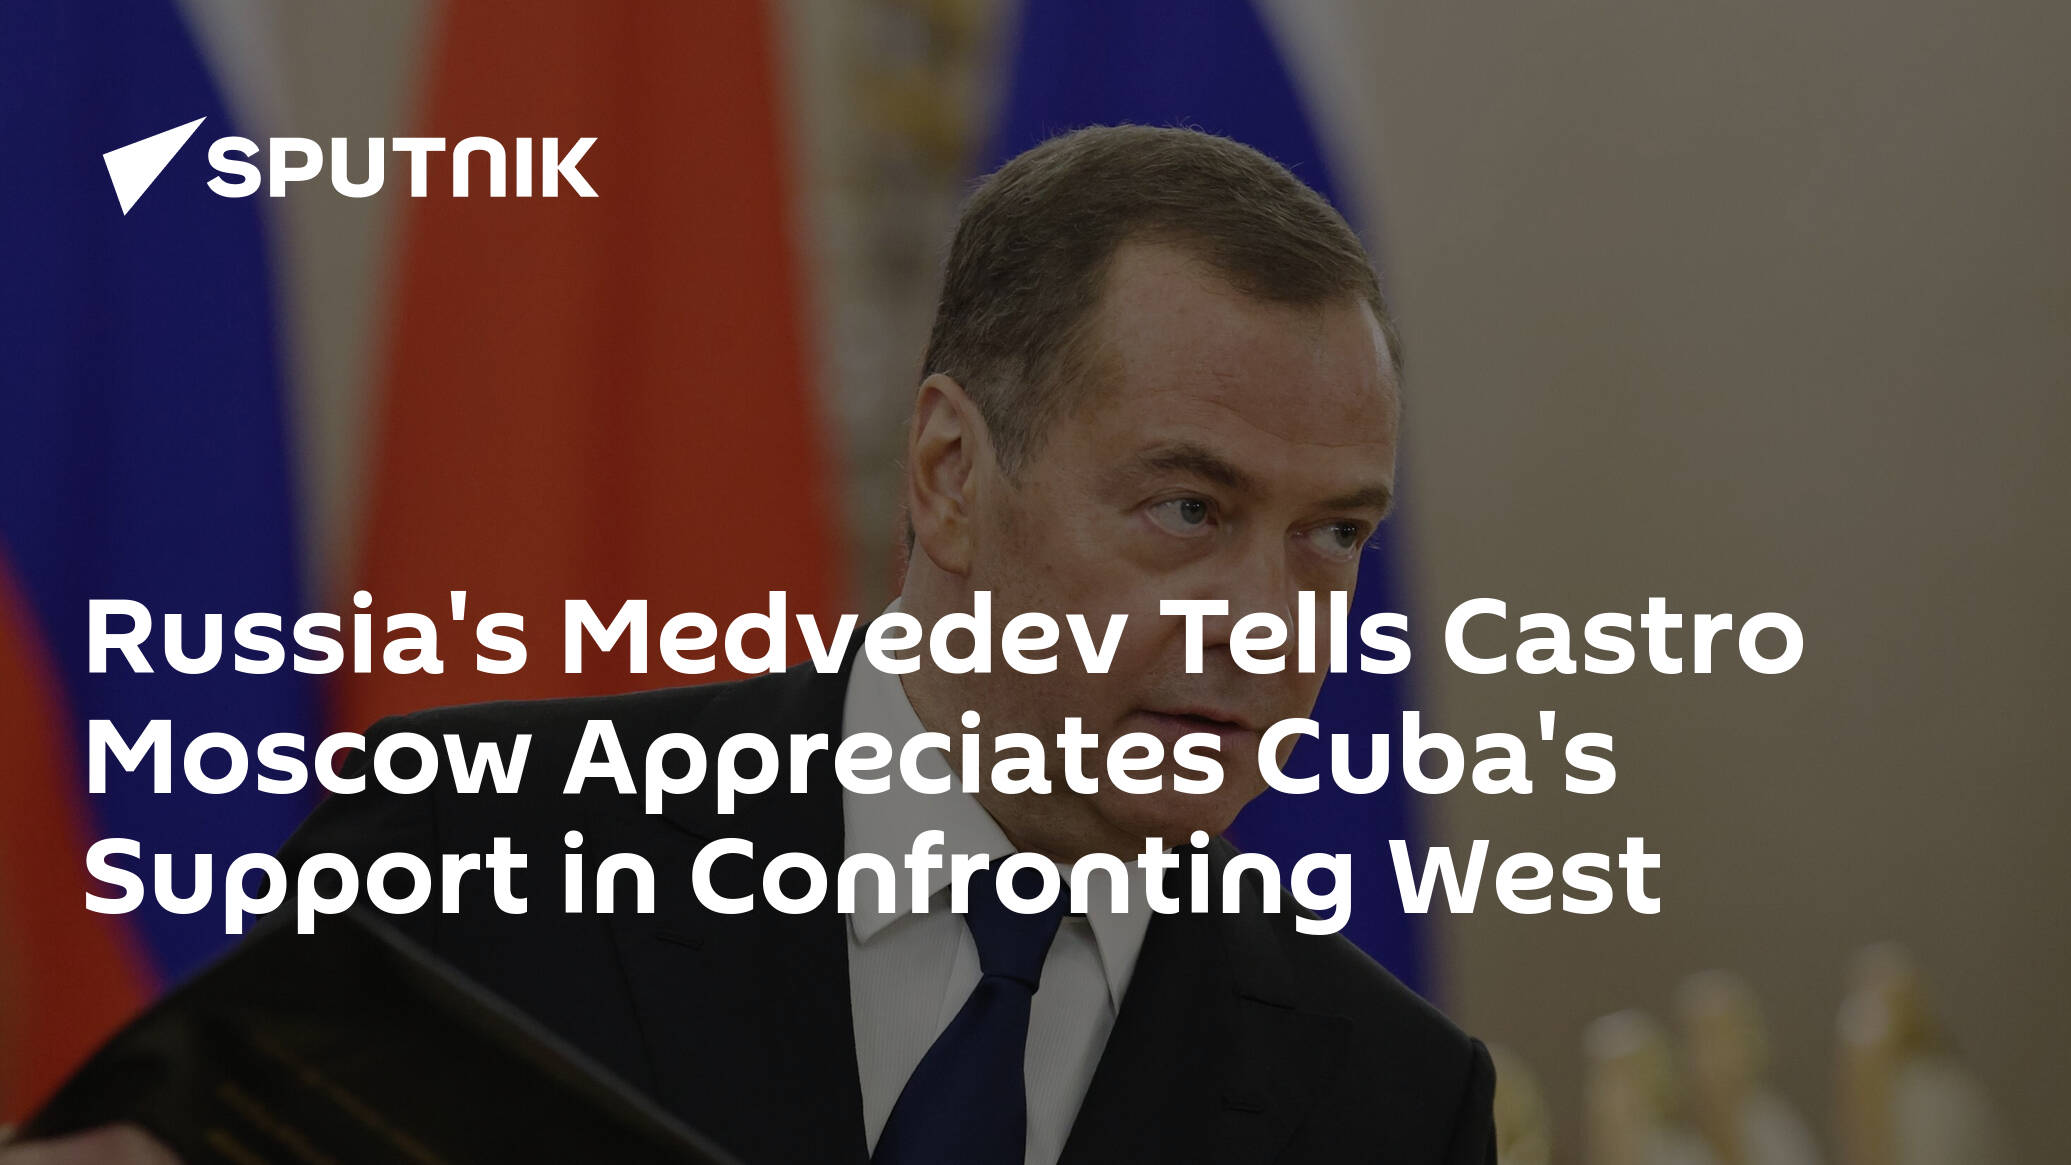 Russia's Medvedev Tells Castro Moscow Appreciates Cuba's Support in Confronting West